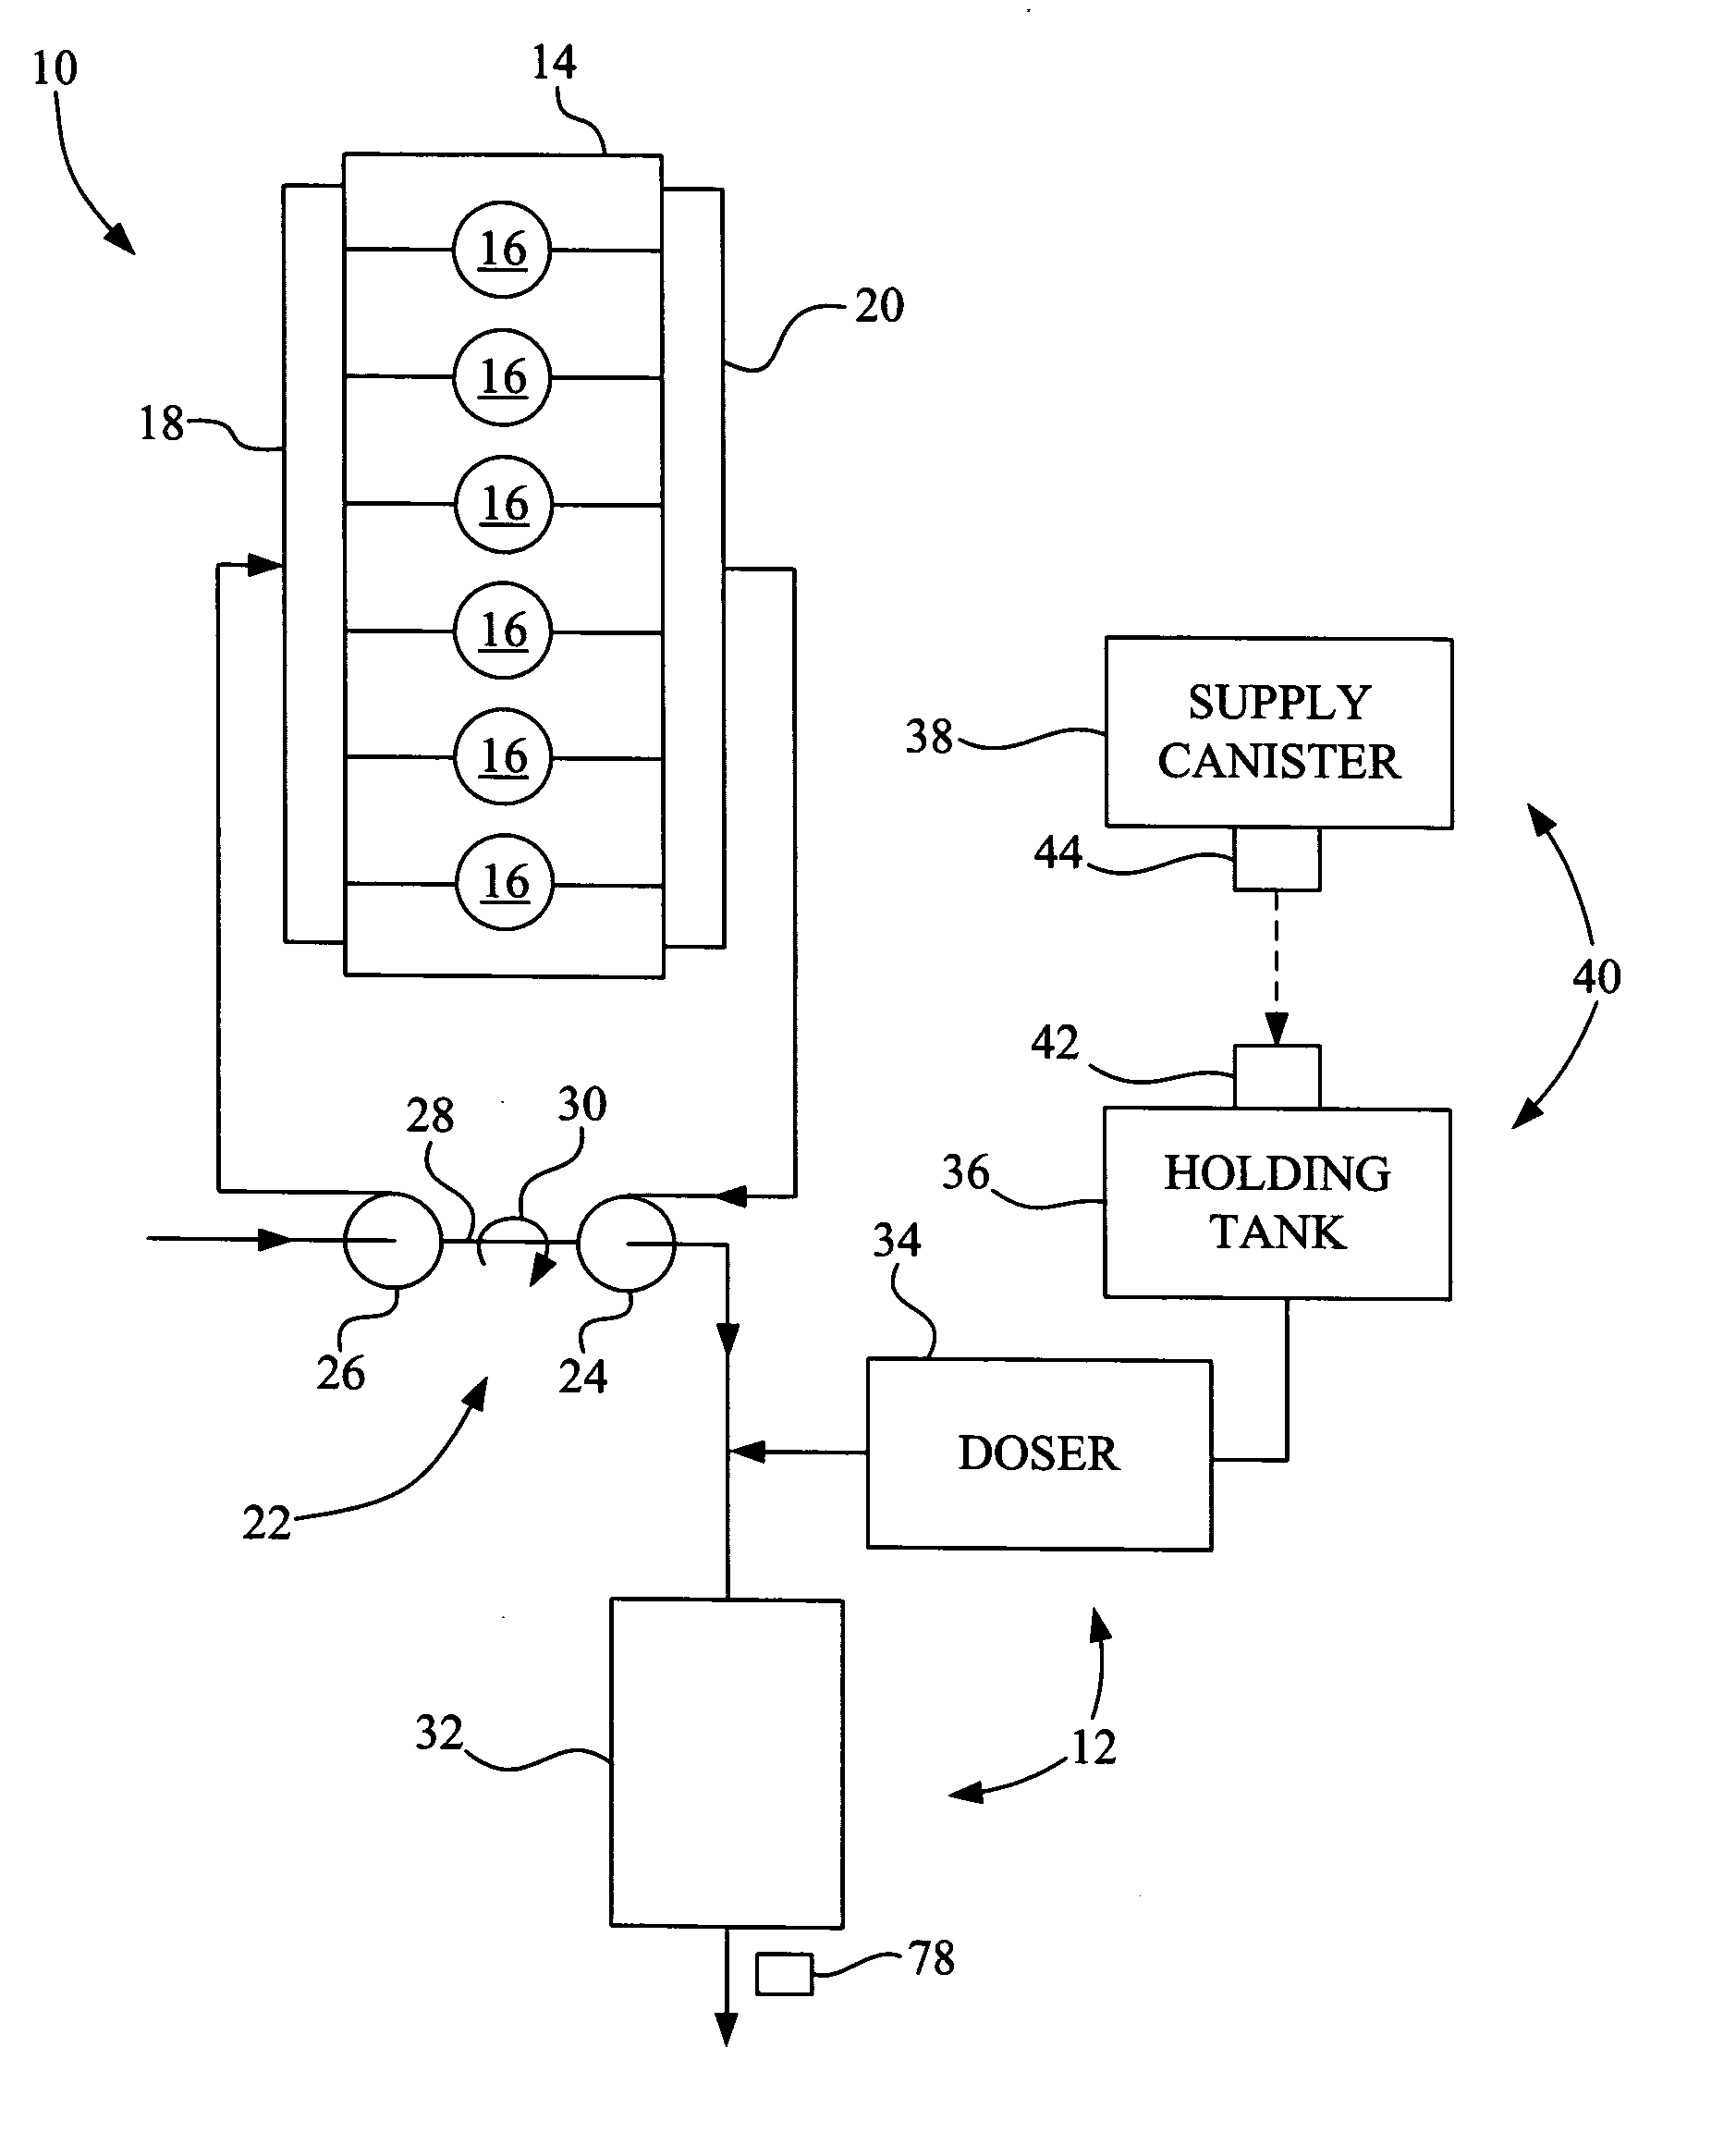 Reagent refill and supply system for an SCR exhaust aftertreatment system